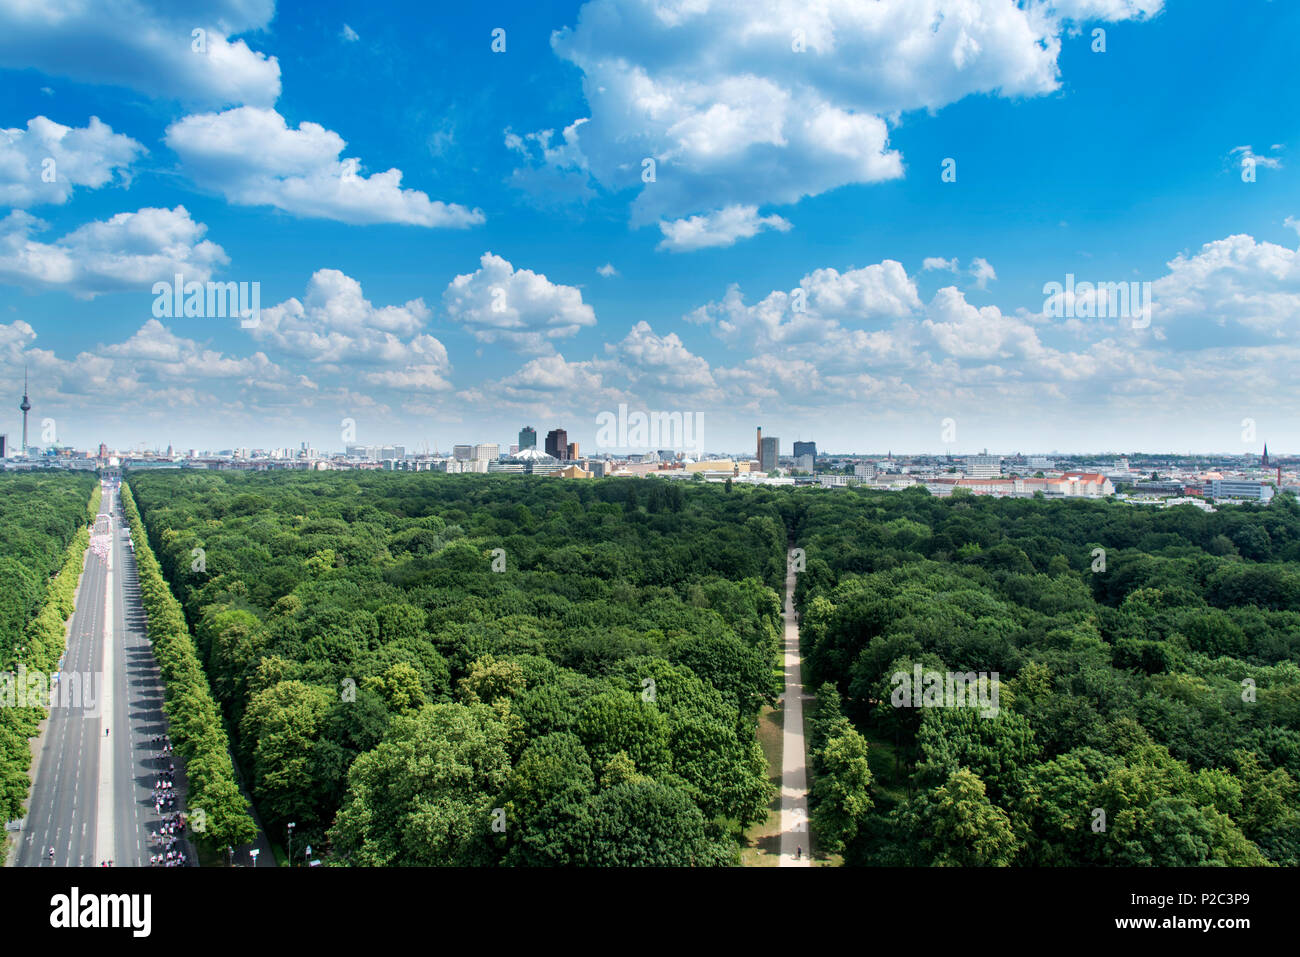 an aerial view of the Tiergarten park in Berlin, Germany, with the skyline of the city in the background, highlighting the Fernsehturm television towe Stock Photo